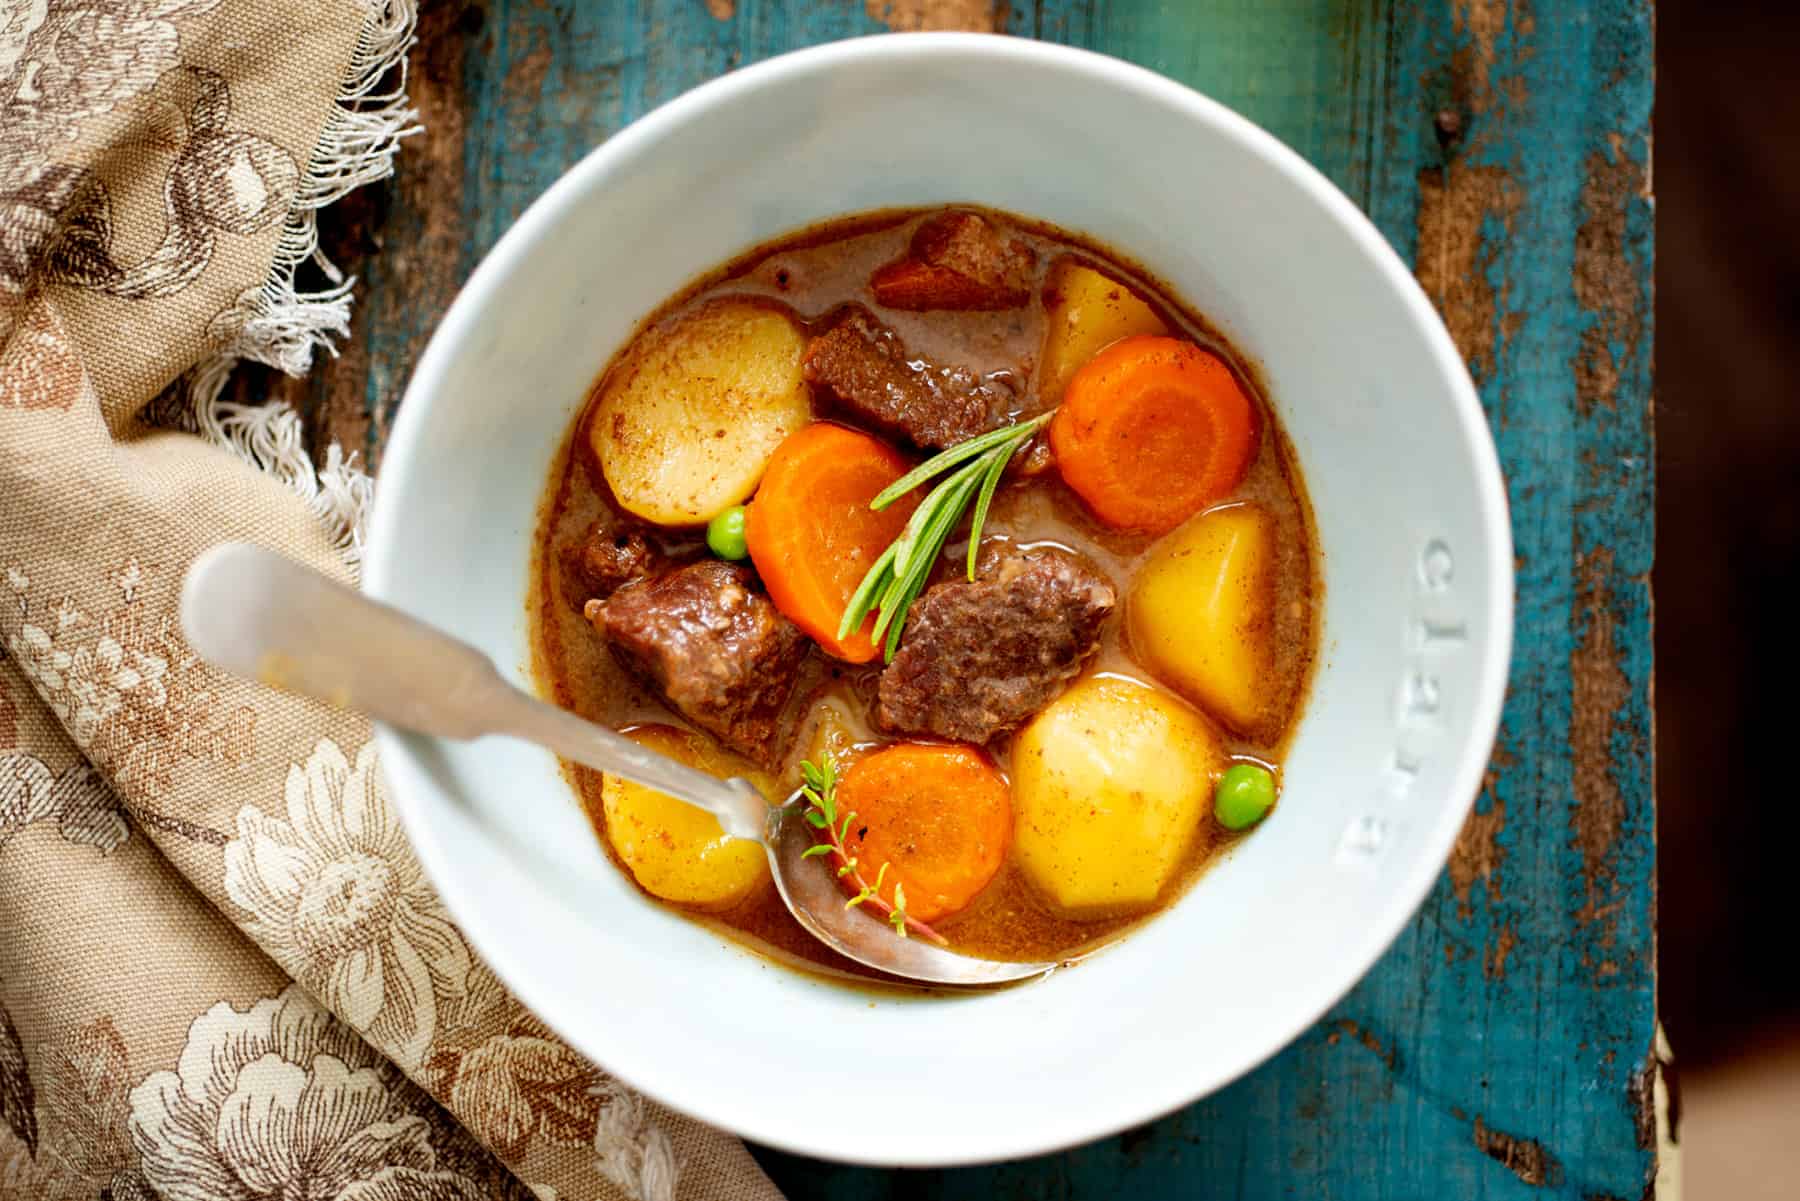 Bowl of instant pot beef stew.